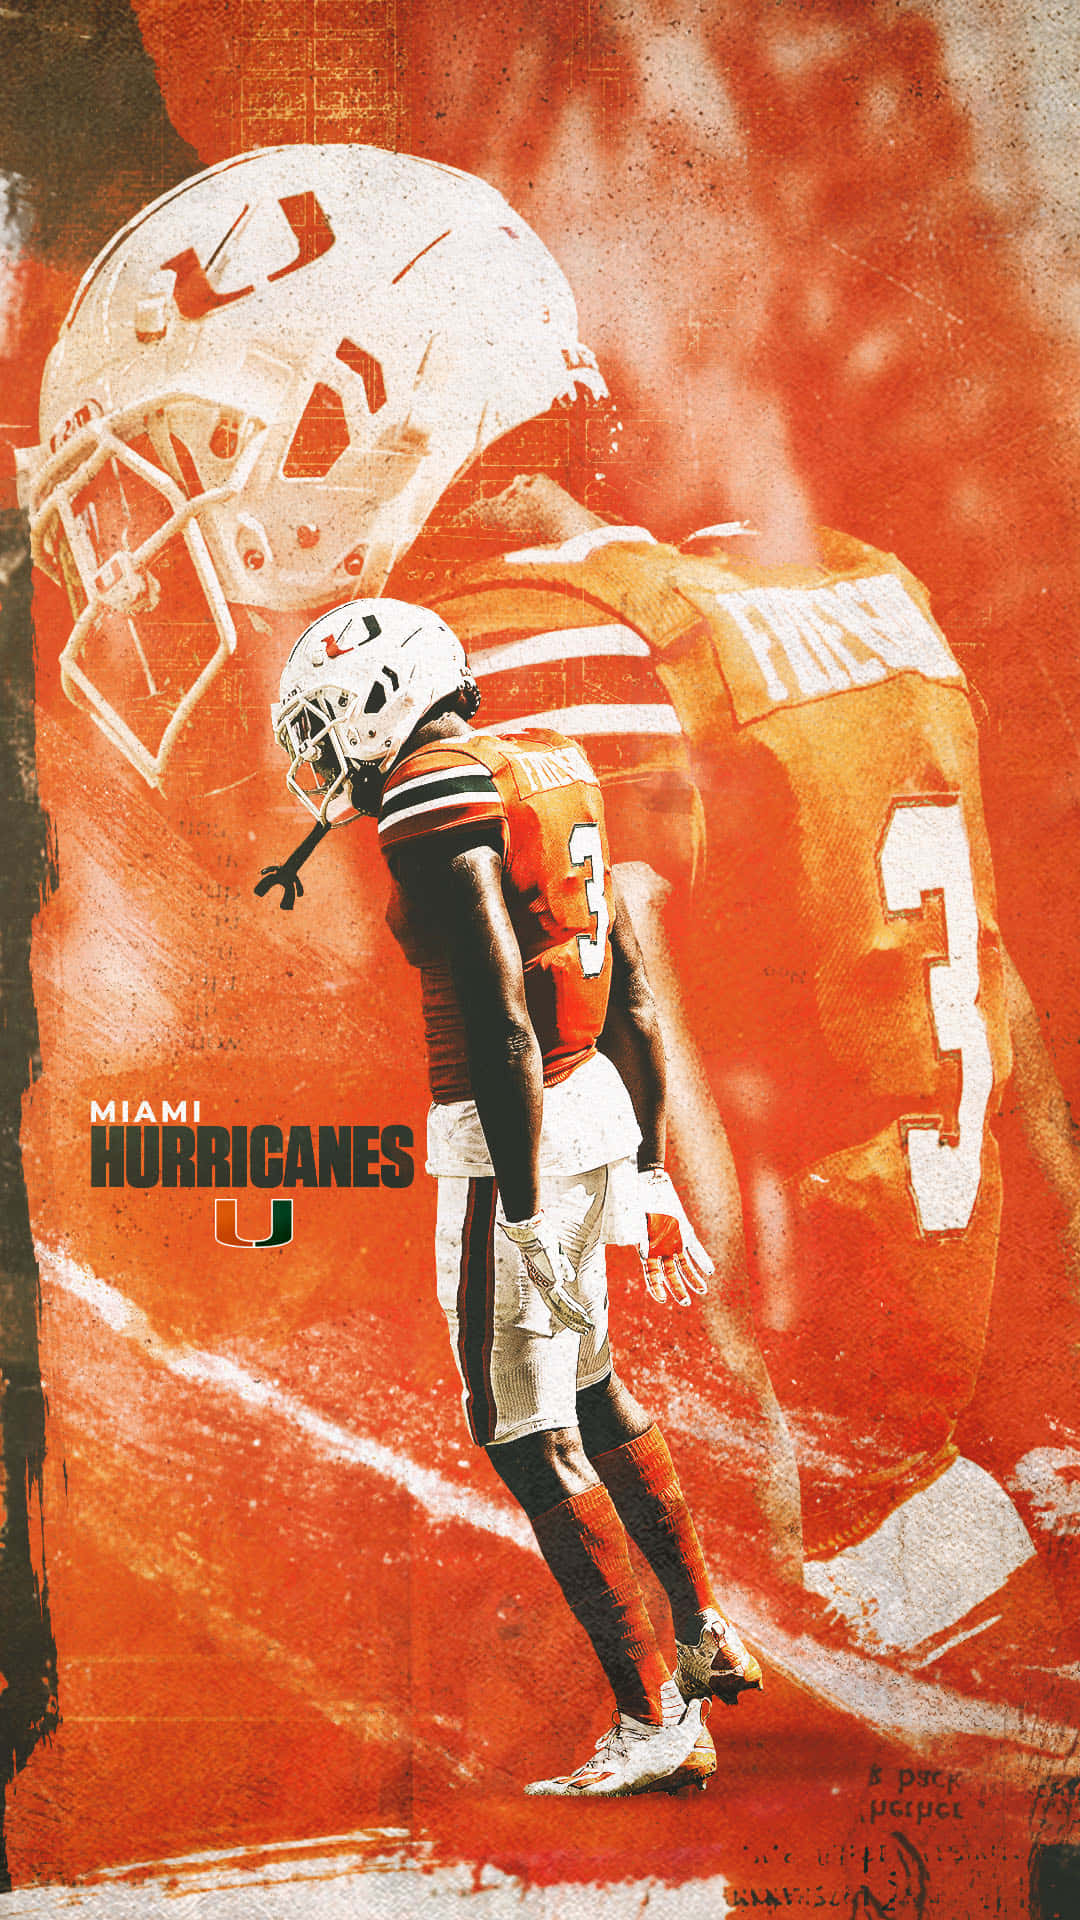 Cheer On The Hurricanes With U! Wallpaper